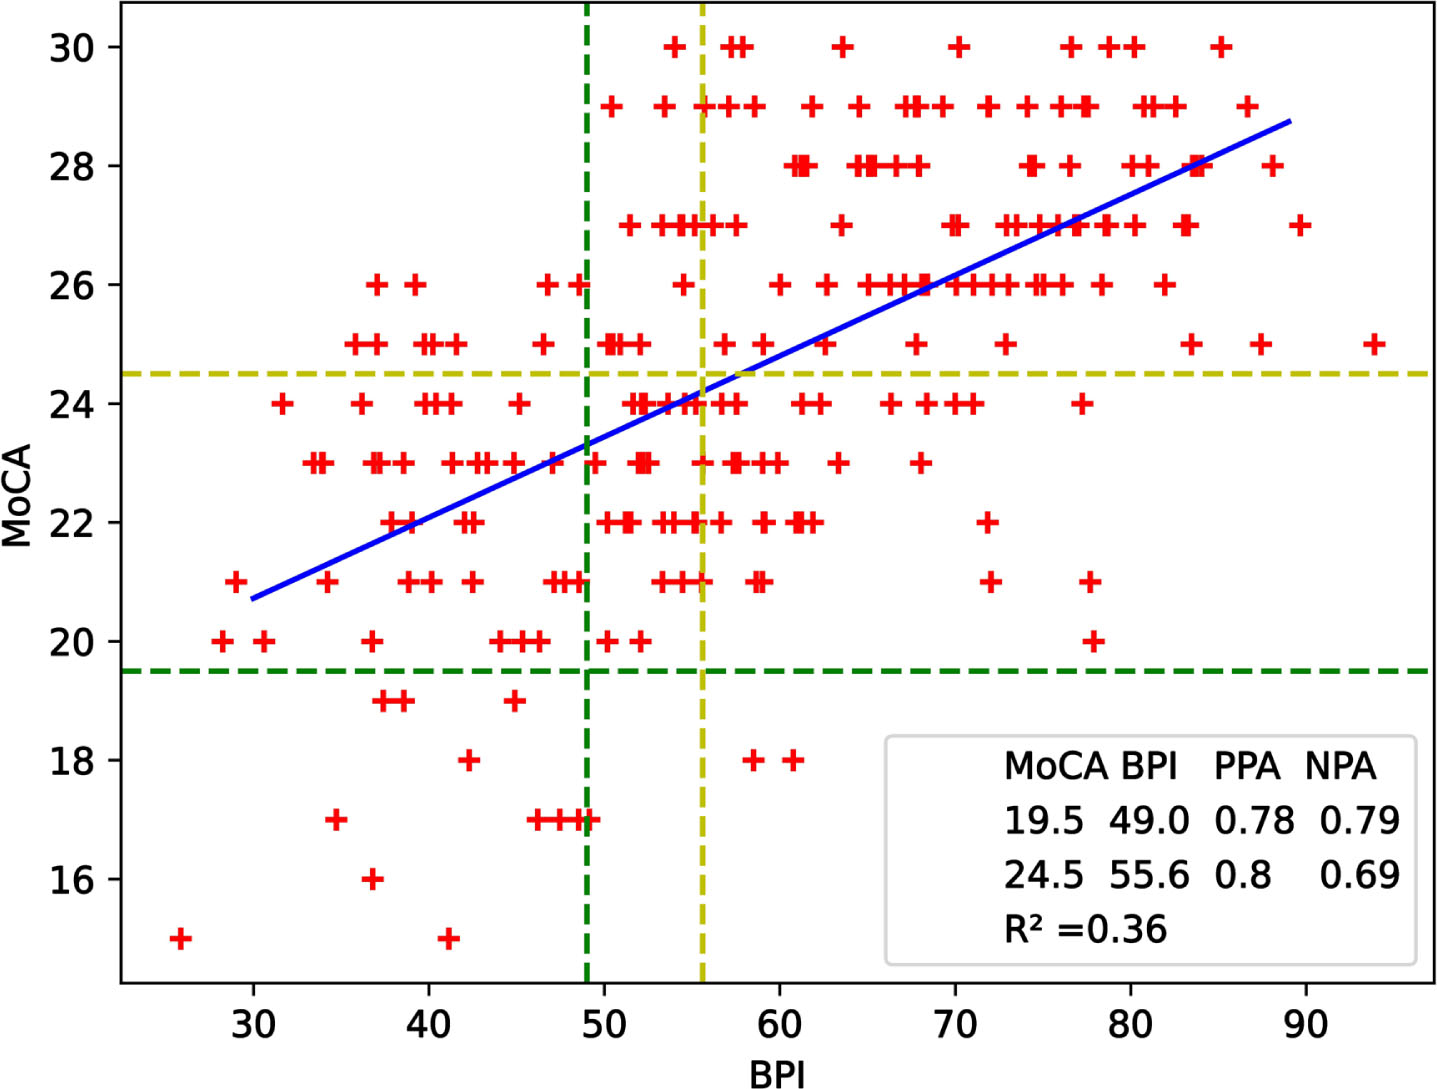 Scatterplot of MoCA and BPI scores of participants for validation study. The blue linear regression line, described by the equation y = (0.14±0.01)×BPI + (16.65±0.76), has an R∧2 of 0.36. Green lines correspond to lower cut-offs of the tests whereas yellow ones represent upper cut-offs. NPA = 0.79 and PPA = 0.78 for the lower cut-offs while NPA = 0.69 and PPA = 0.8 for the upper cut-offs.